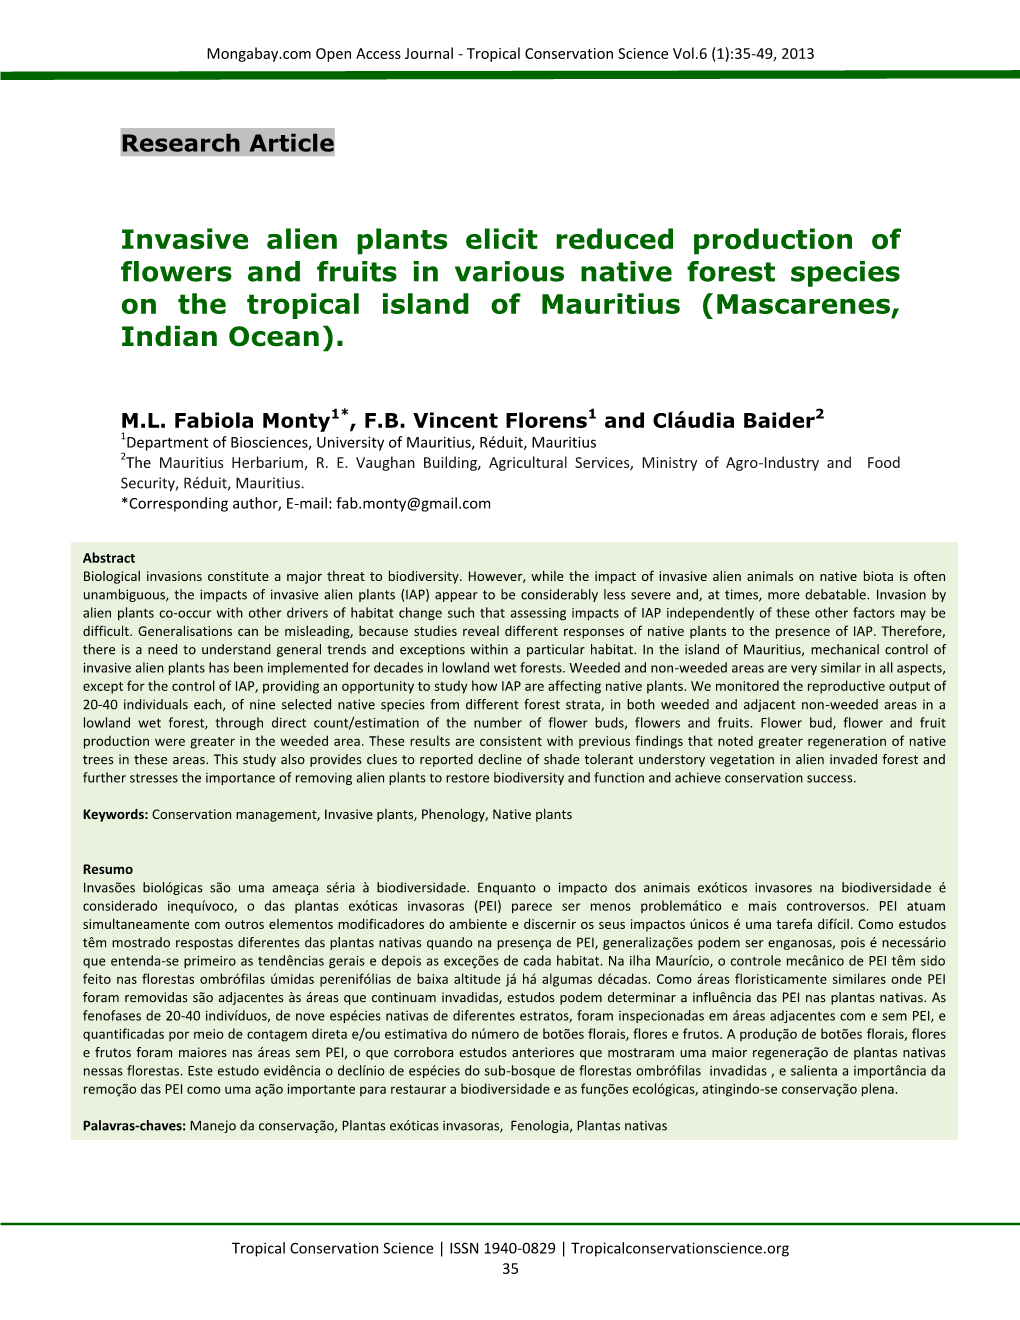 Invasive Alien Plants Elicit Reduced Production of Flowers and Fruits in Various Native Forest Species on the Tropical Island of Mauritius (Mascarenes, Indian Ocean)